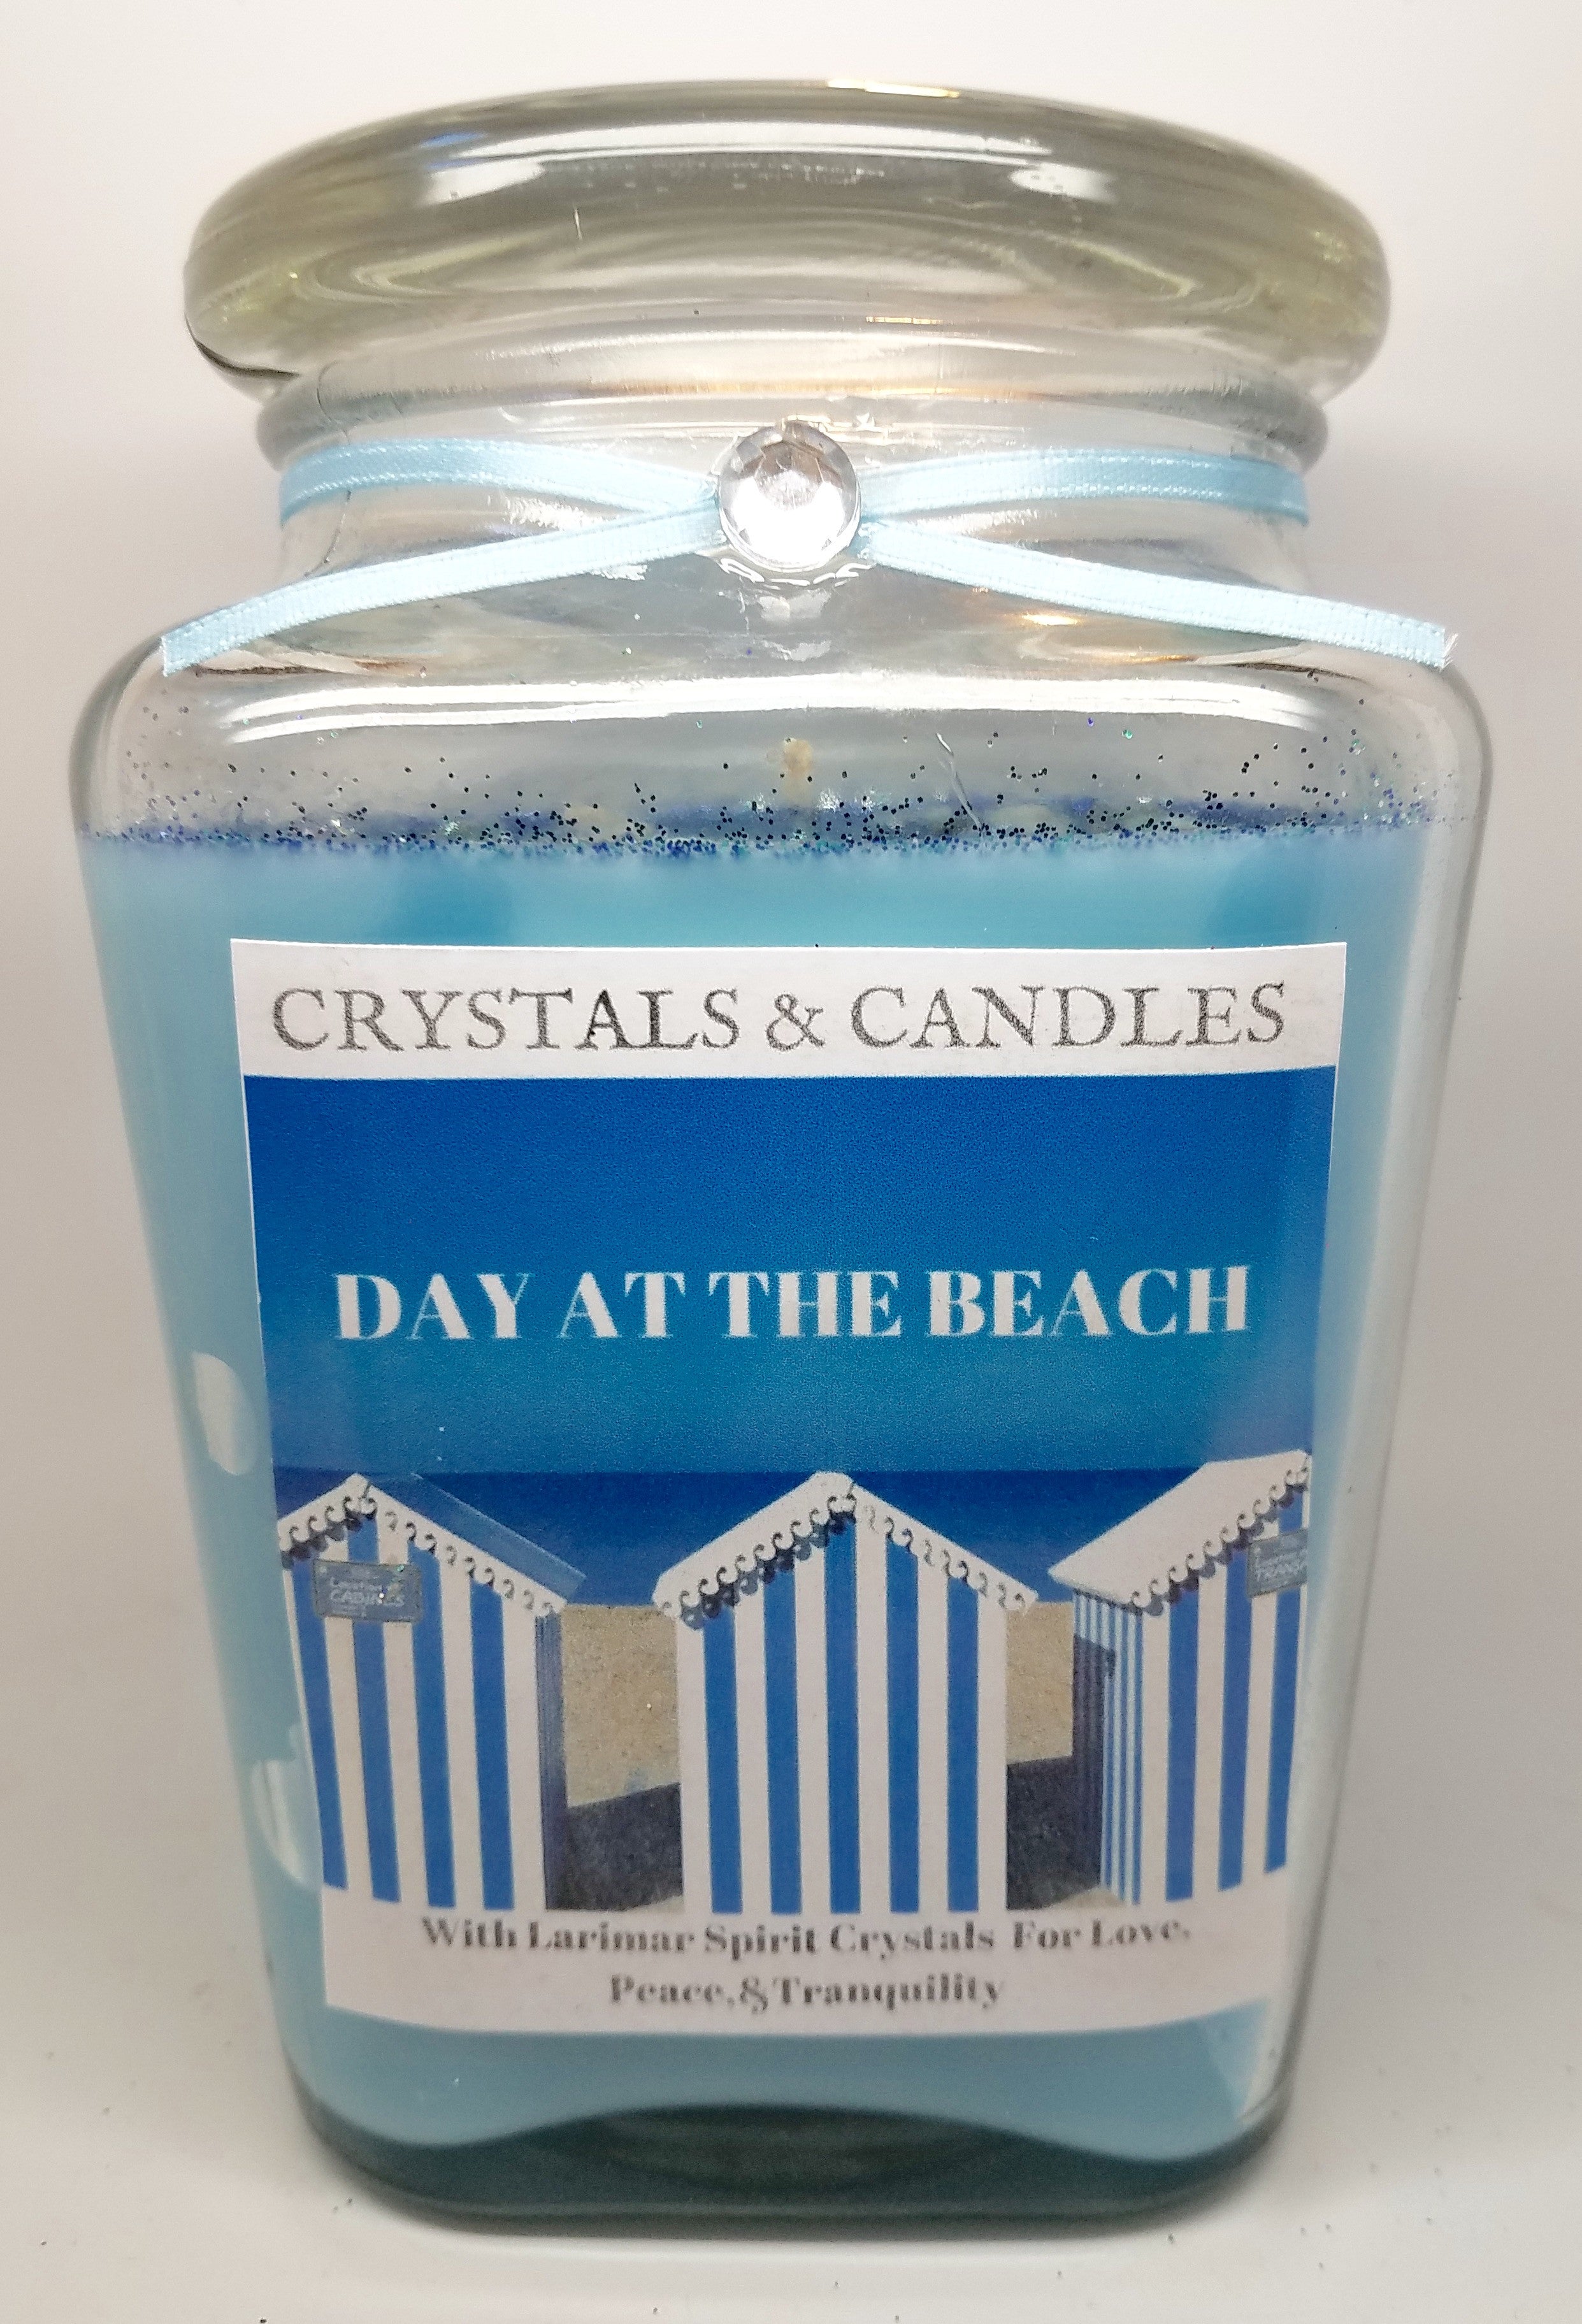 Day At The Beach - Larimar Crystal Jewelry Candle